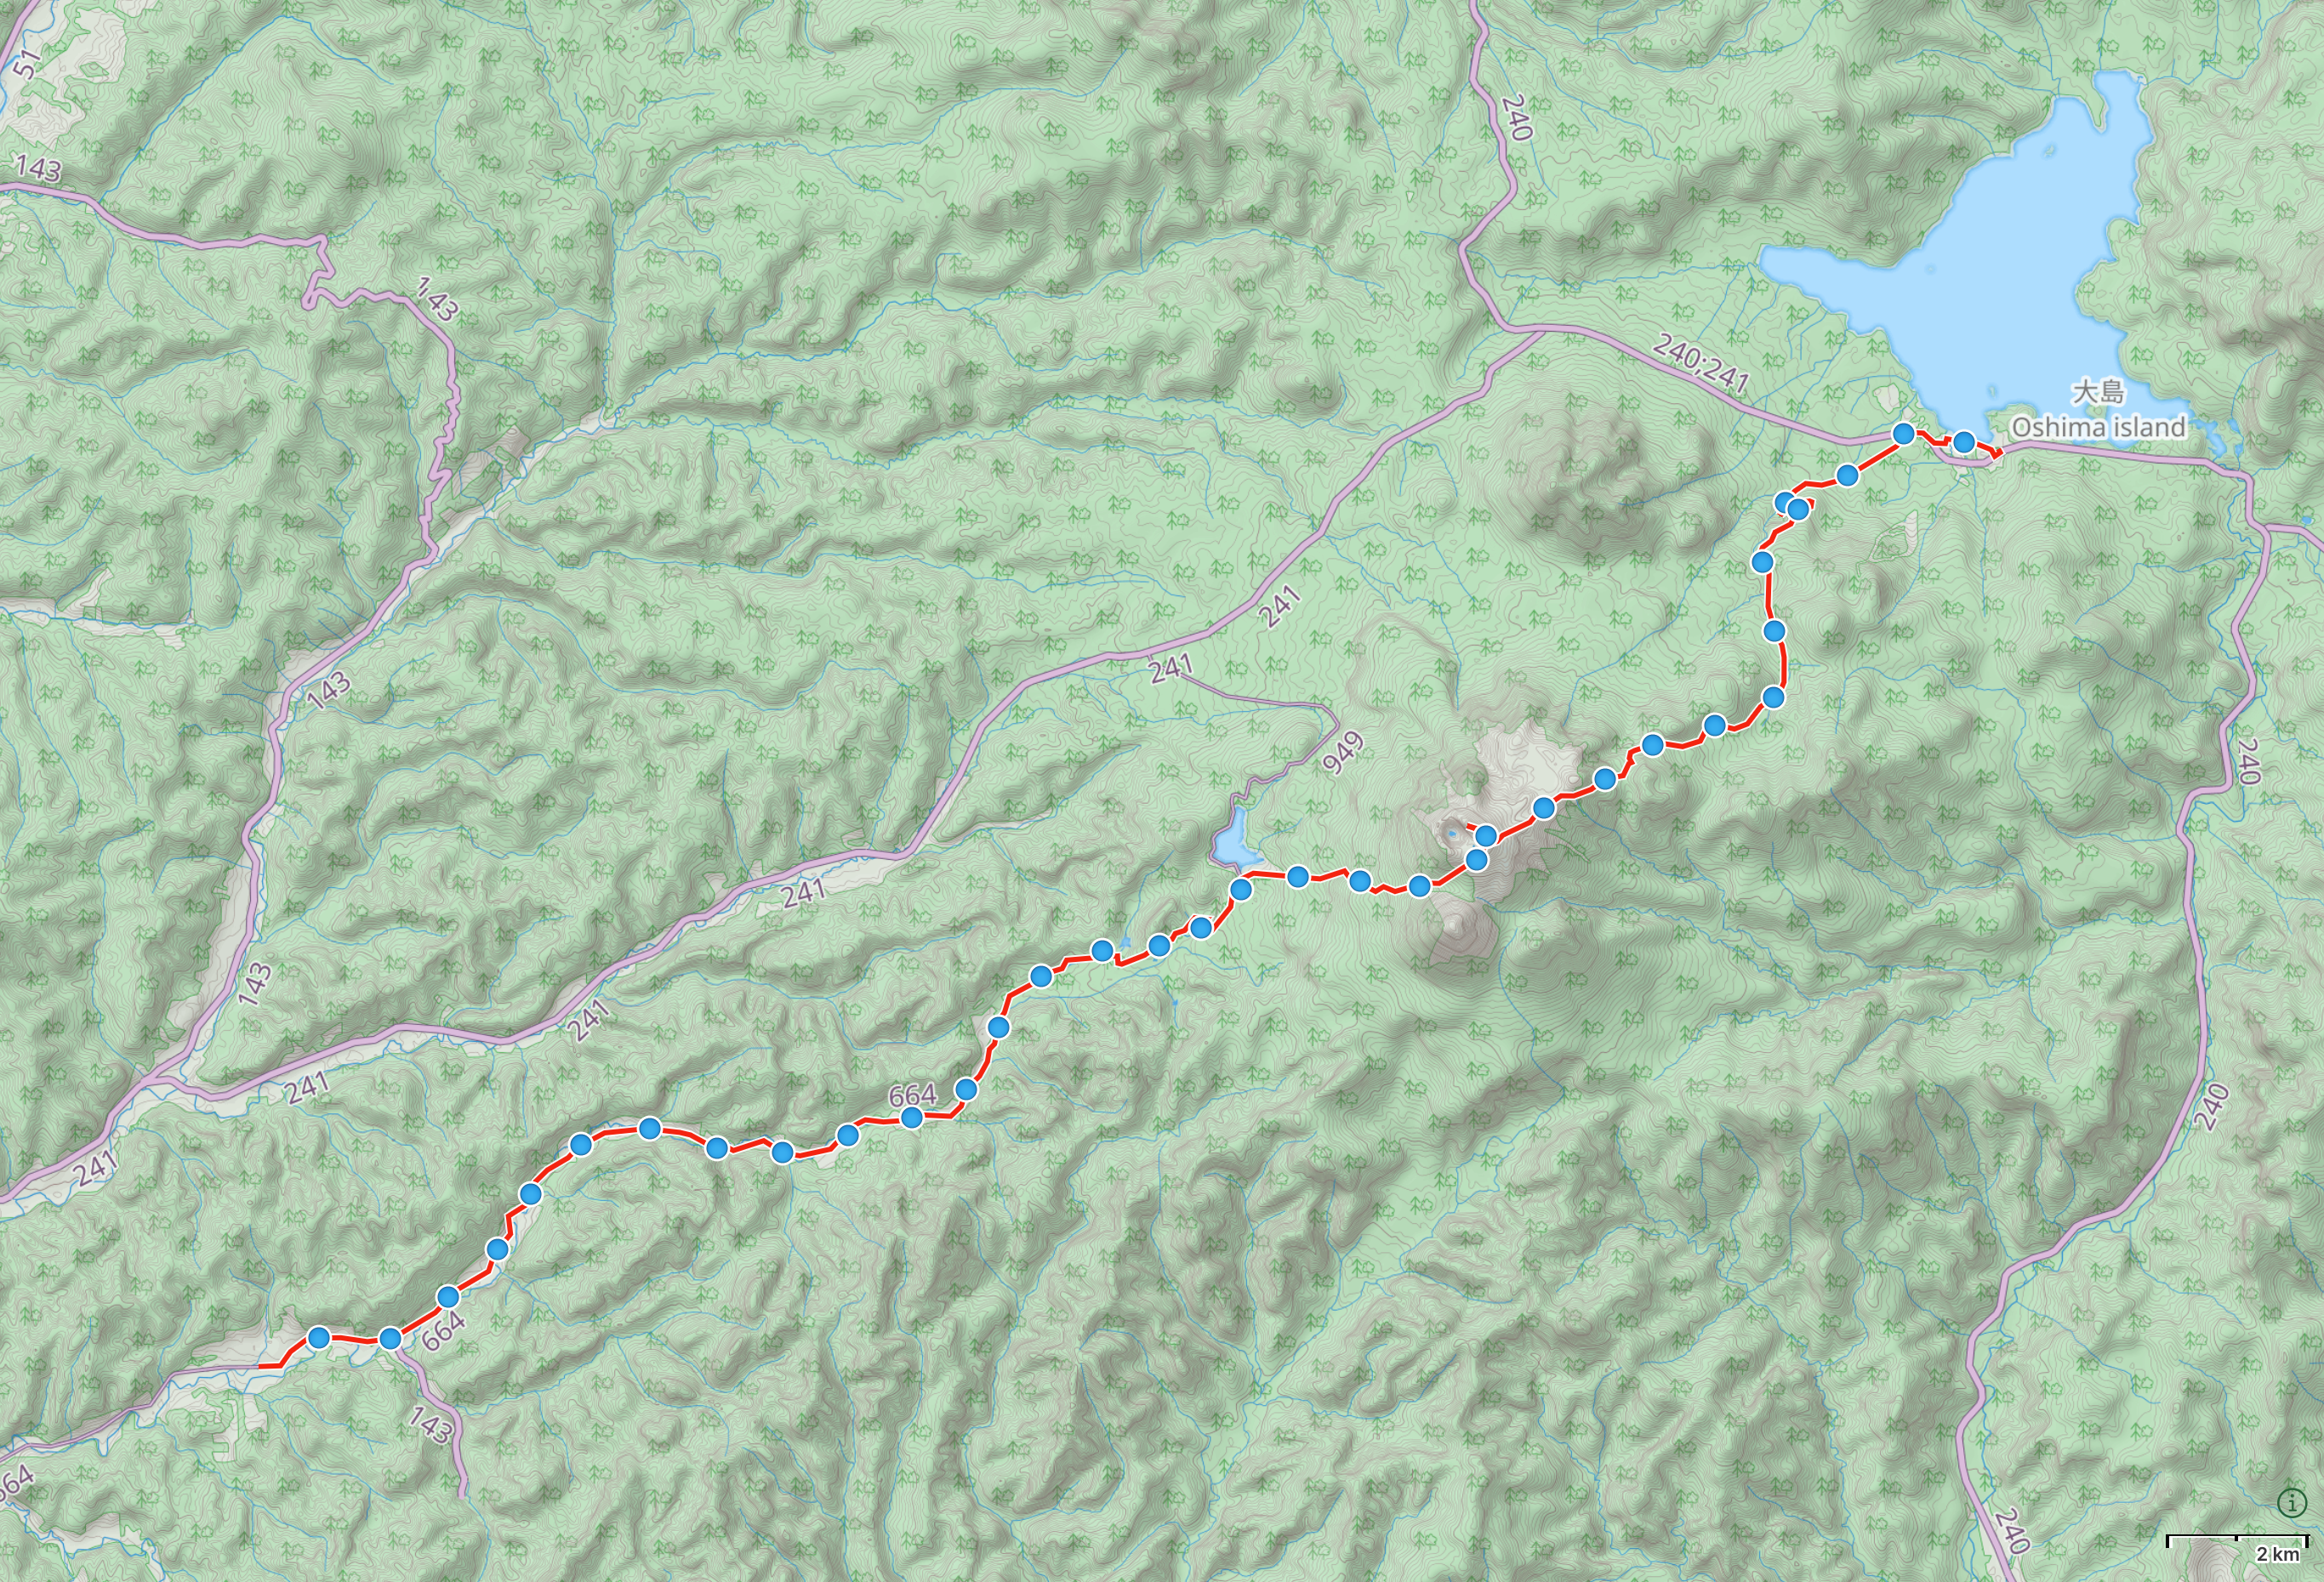 Map of Hokkaido with author’s route from Upper Rawan across Mount Meakan to Lake Akan Hot Spring highlighted.